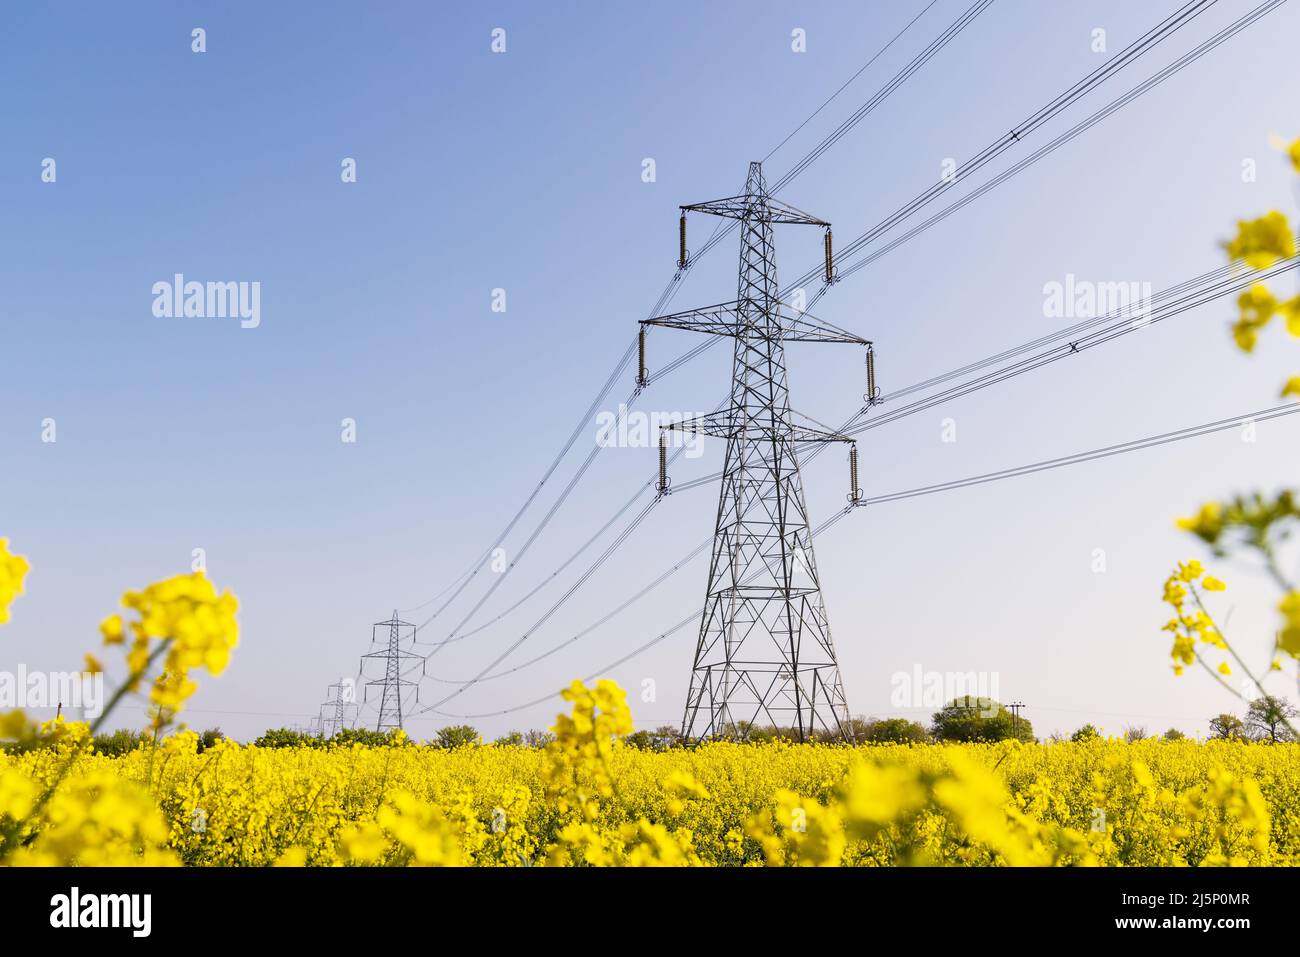 Electricity pylons in a field of rape seed flowers in full bloom on a sunny day. Hertfordshire, UK Stock Photo